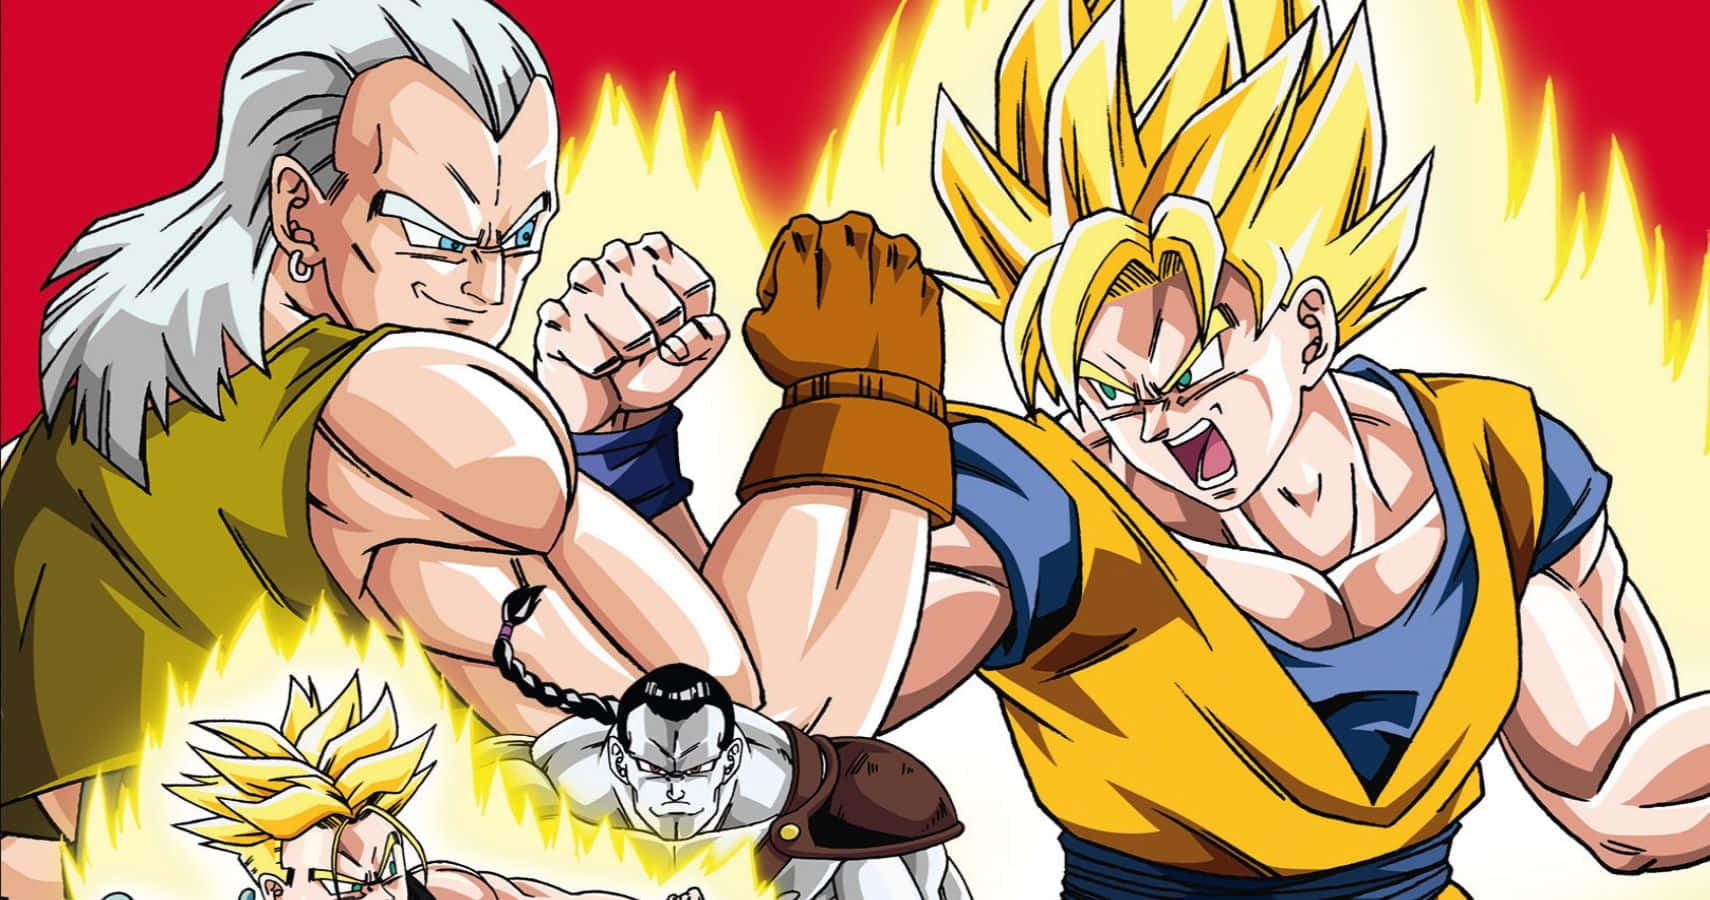 Goku and his friends take on a new adventure in the Dragon Ball Movies Wallpaper